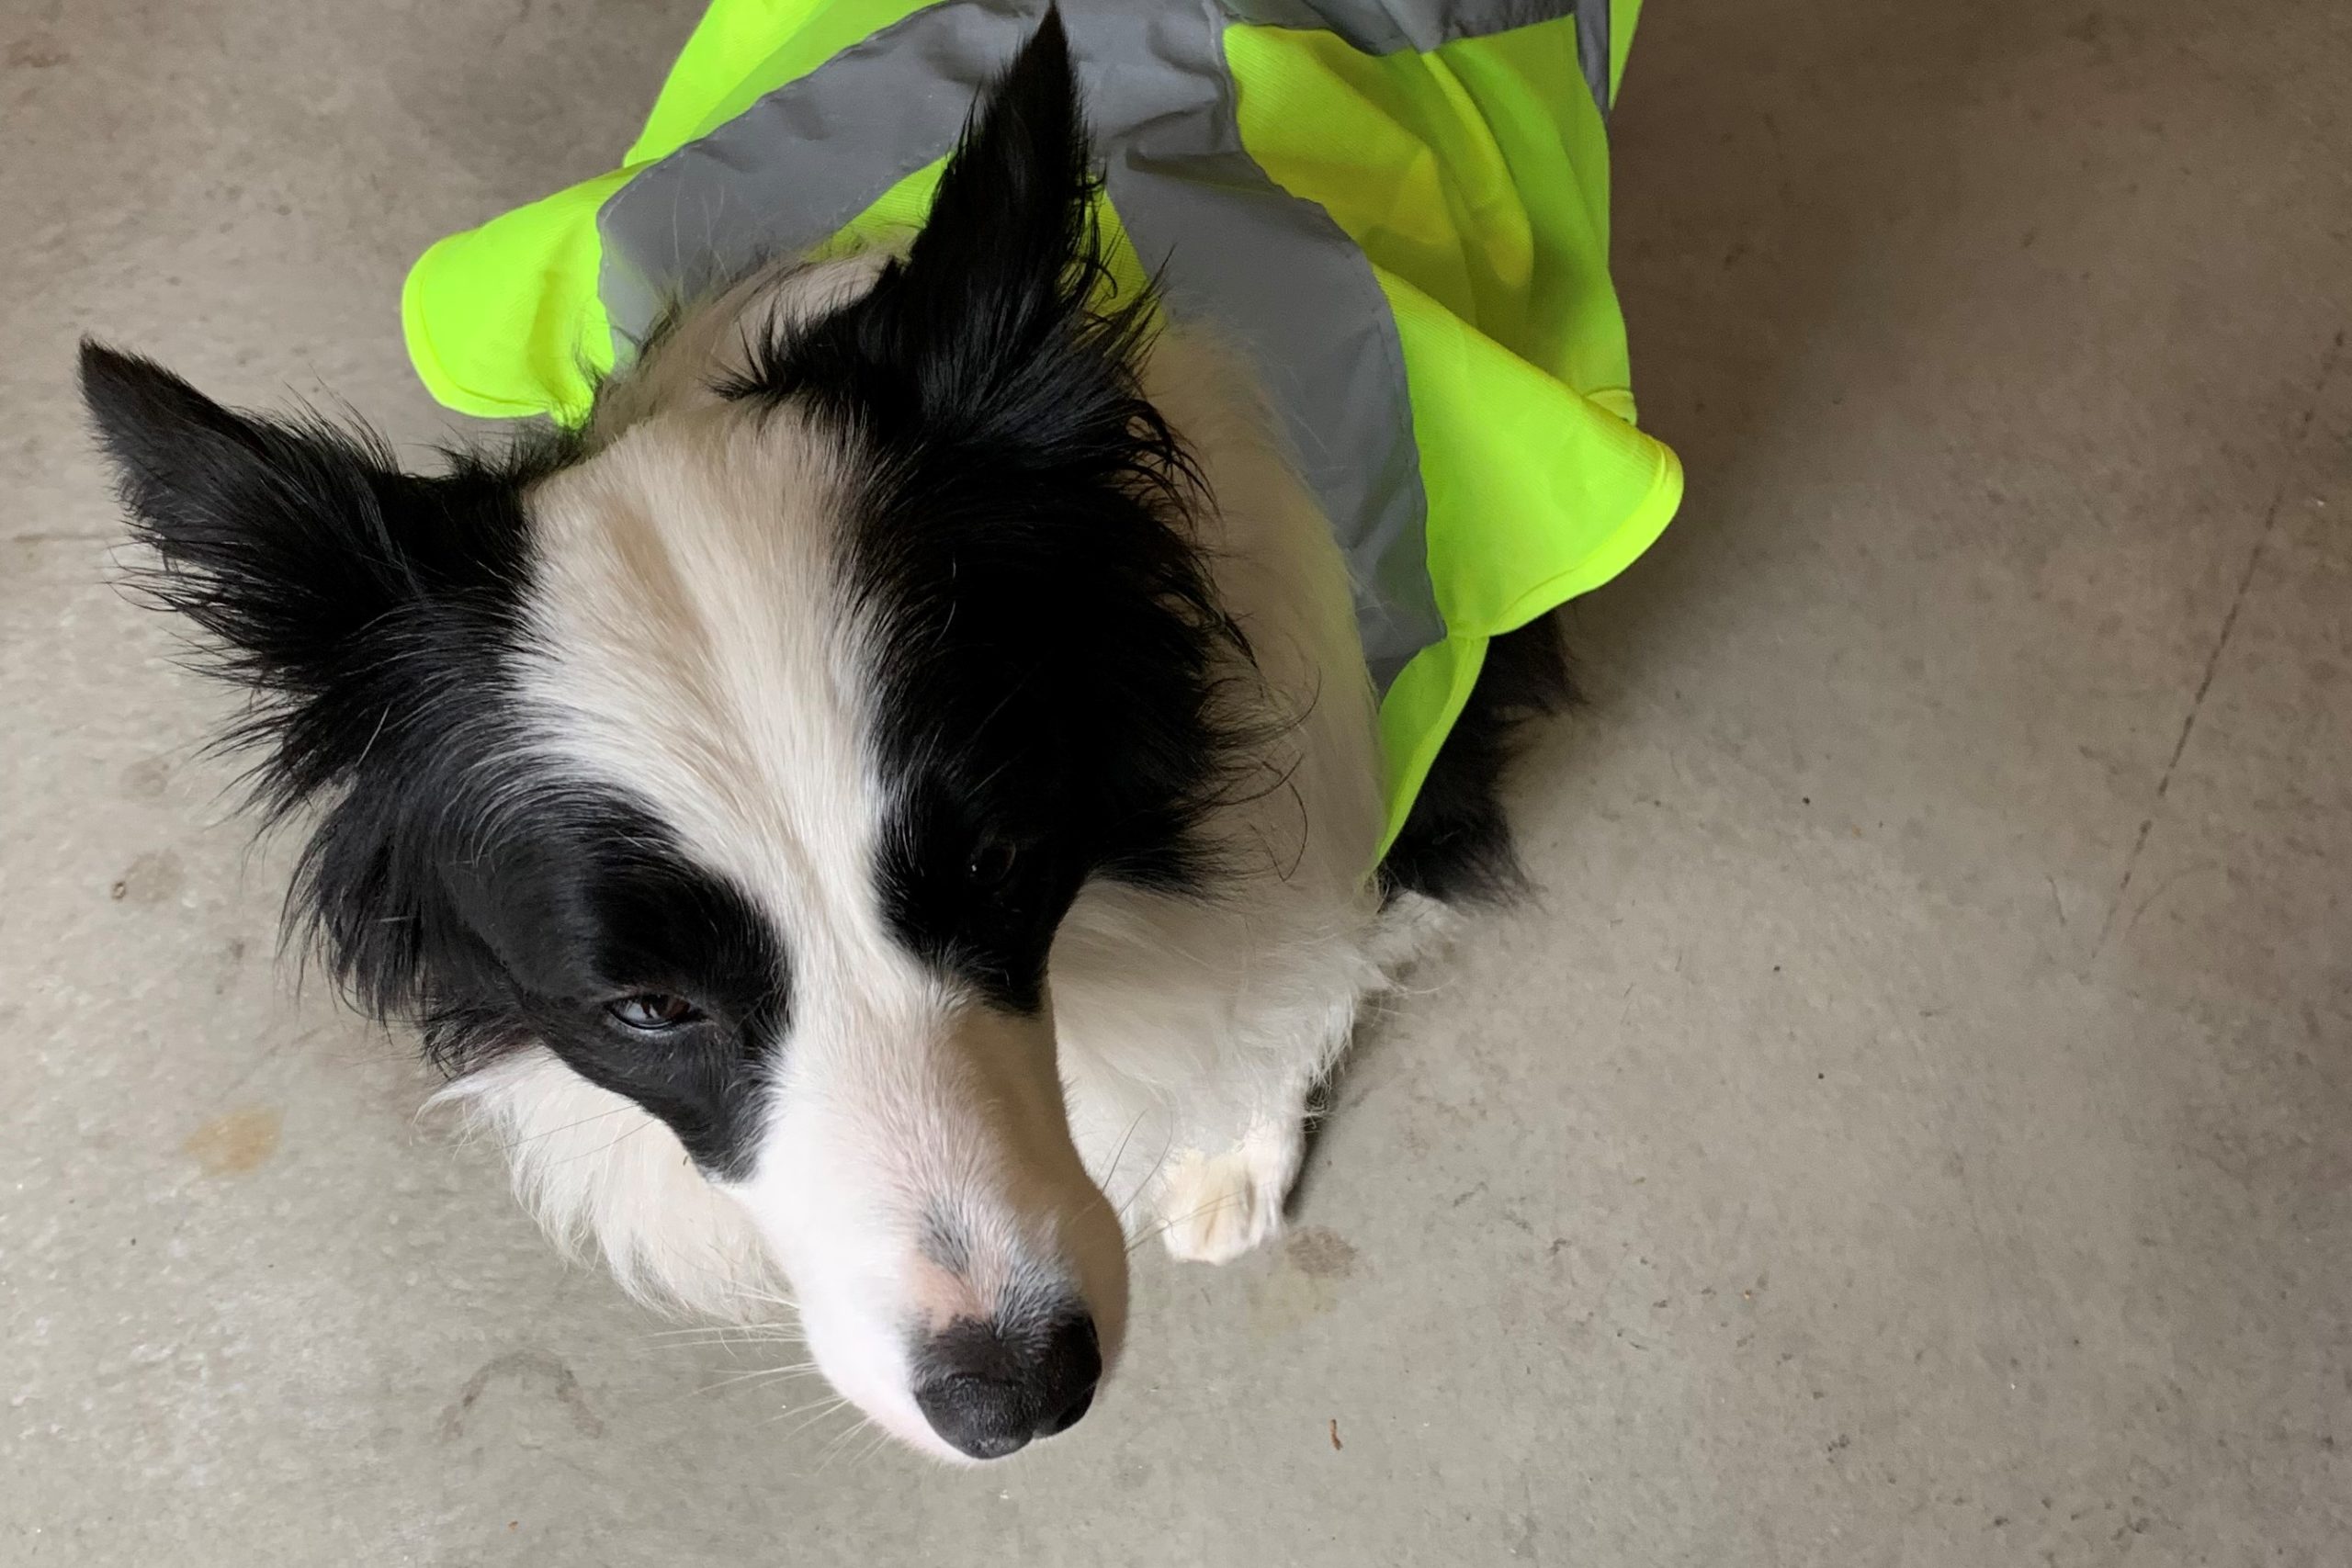 A black and white dog wearing a safety vest is sitting on the concrete floor of a garage.